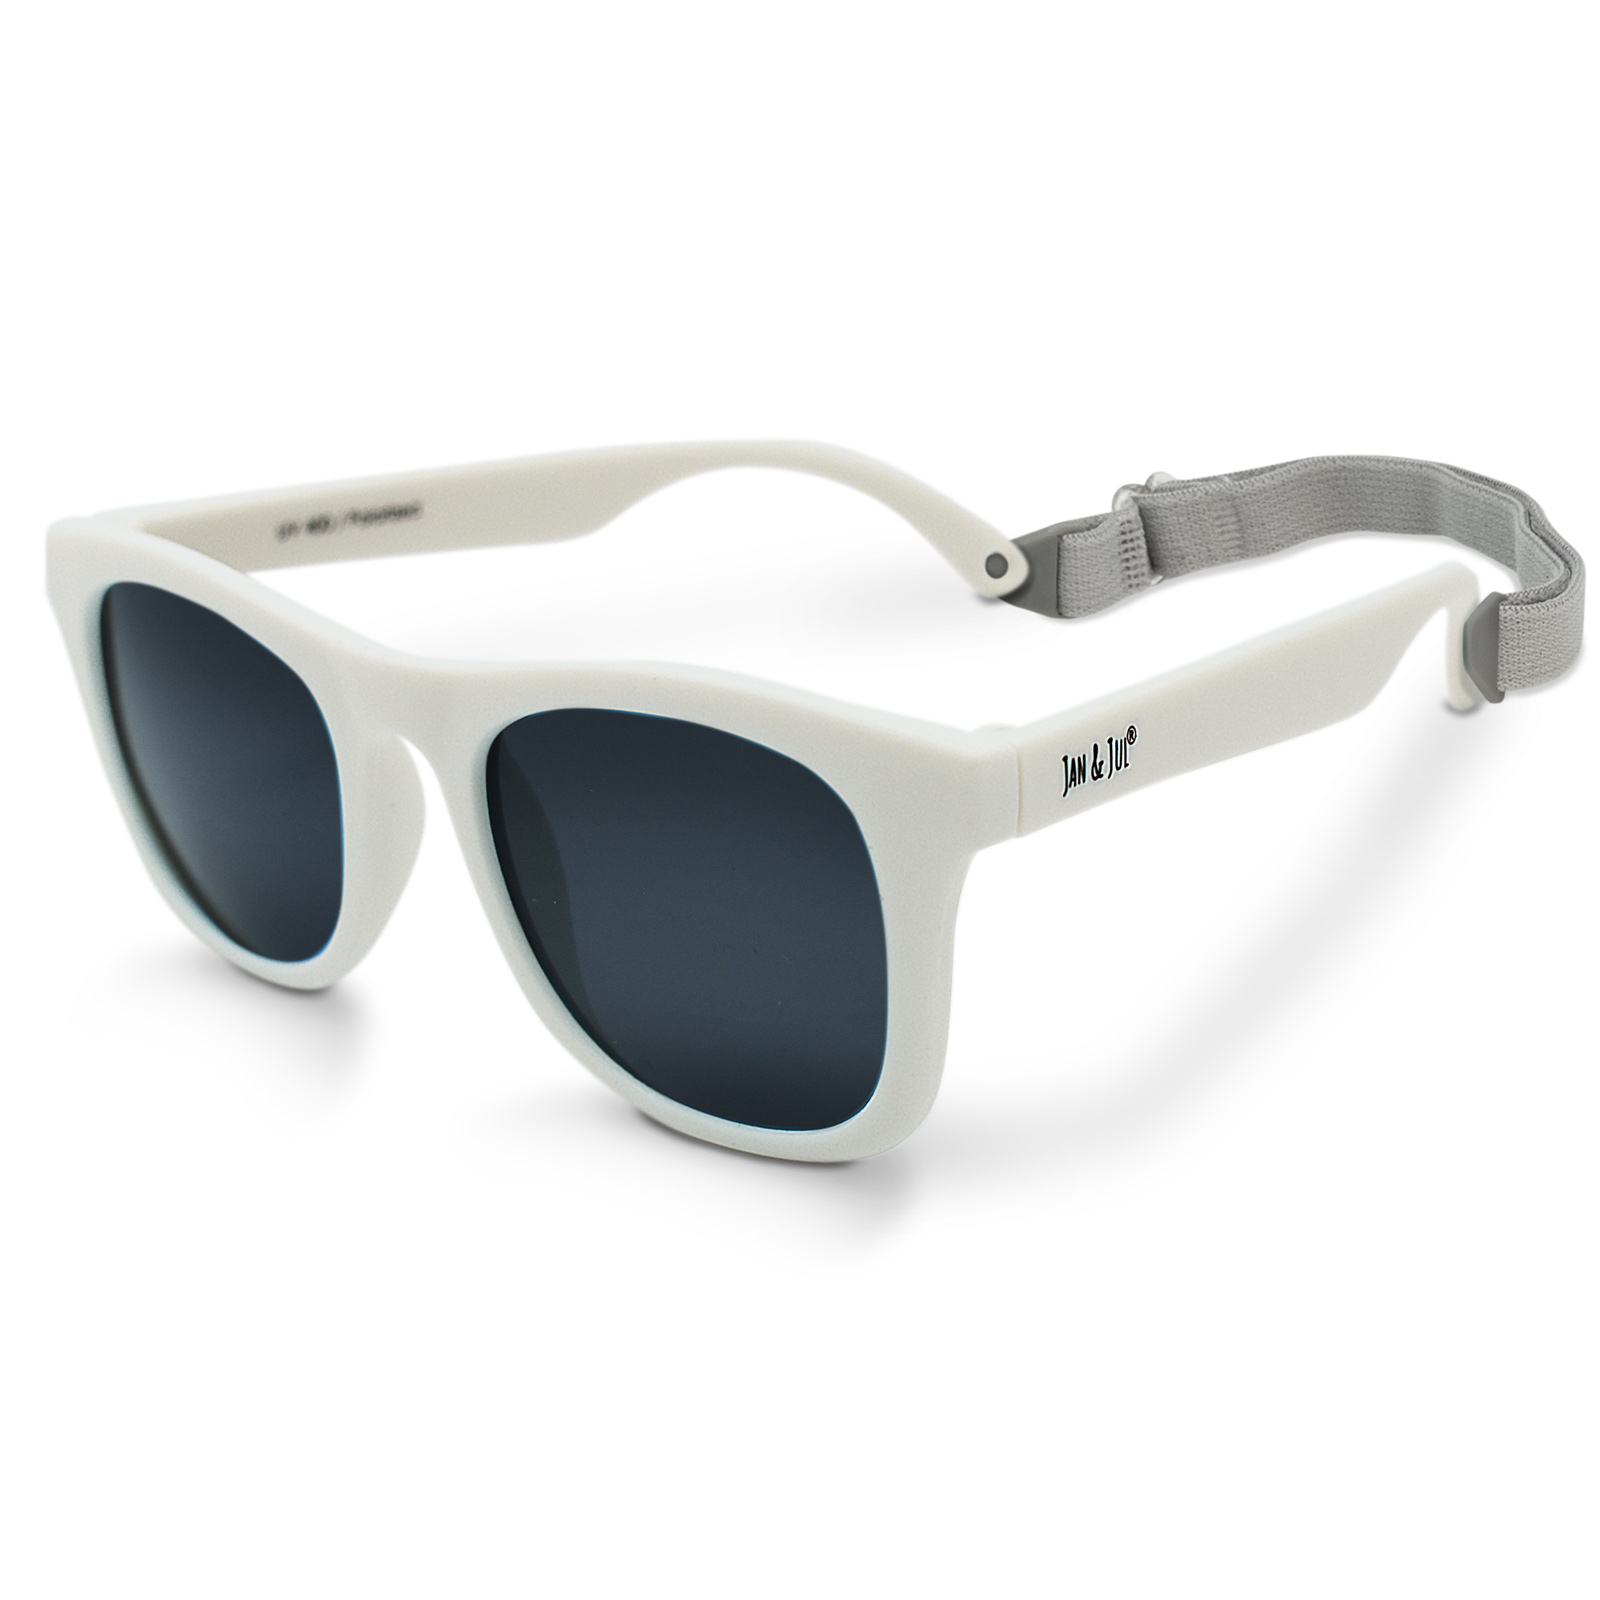 Jan & Jul Infant Sunglasses with Strap, Polarized UV400 Protection (S: 6 Months -2 Years, White) - image 1 of 7